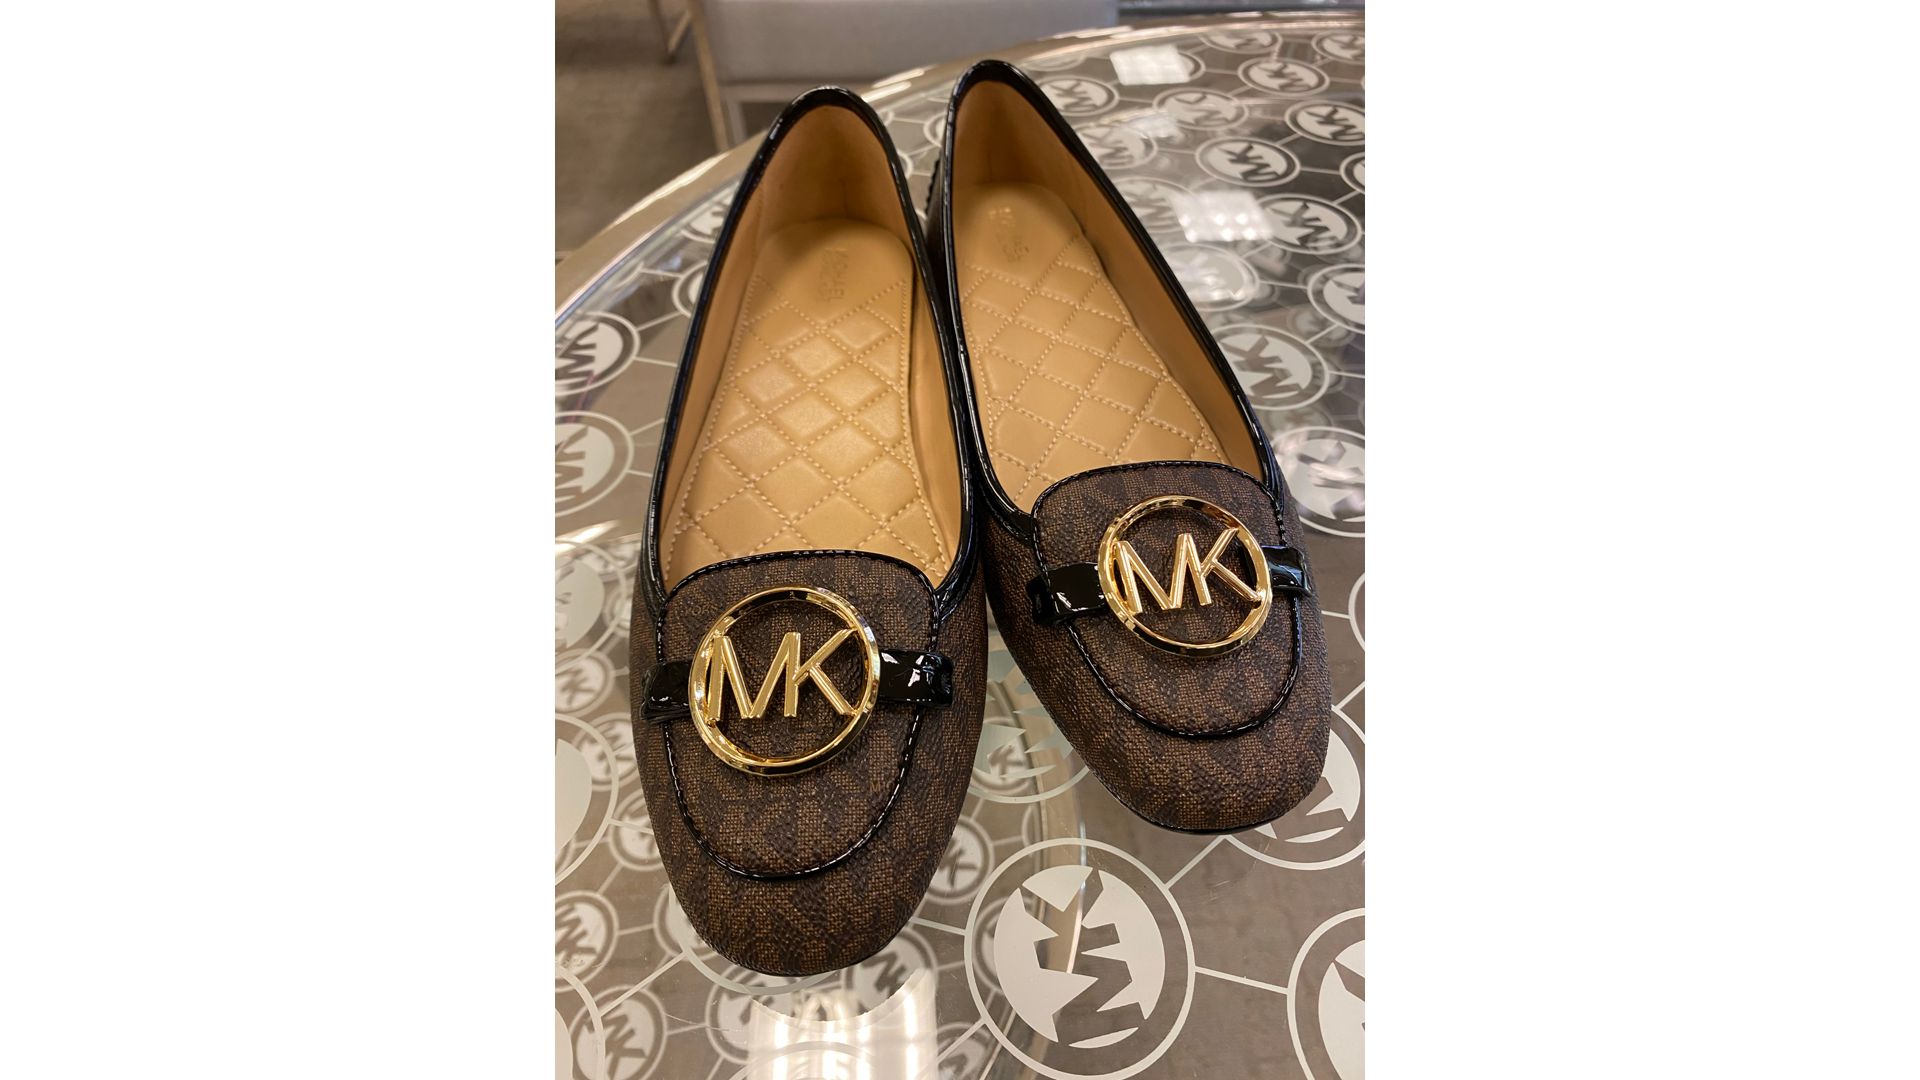 Lillie Moccasin Flats By Michael Kors Macys Style Crew